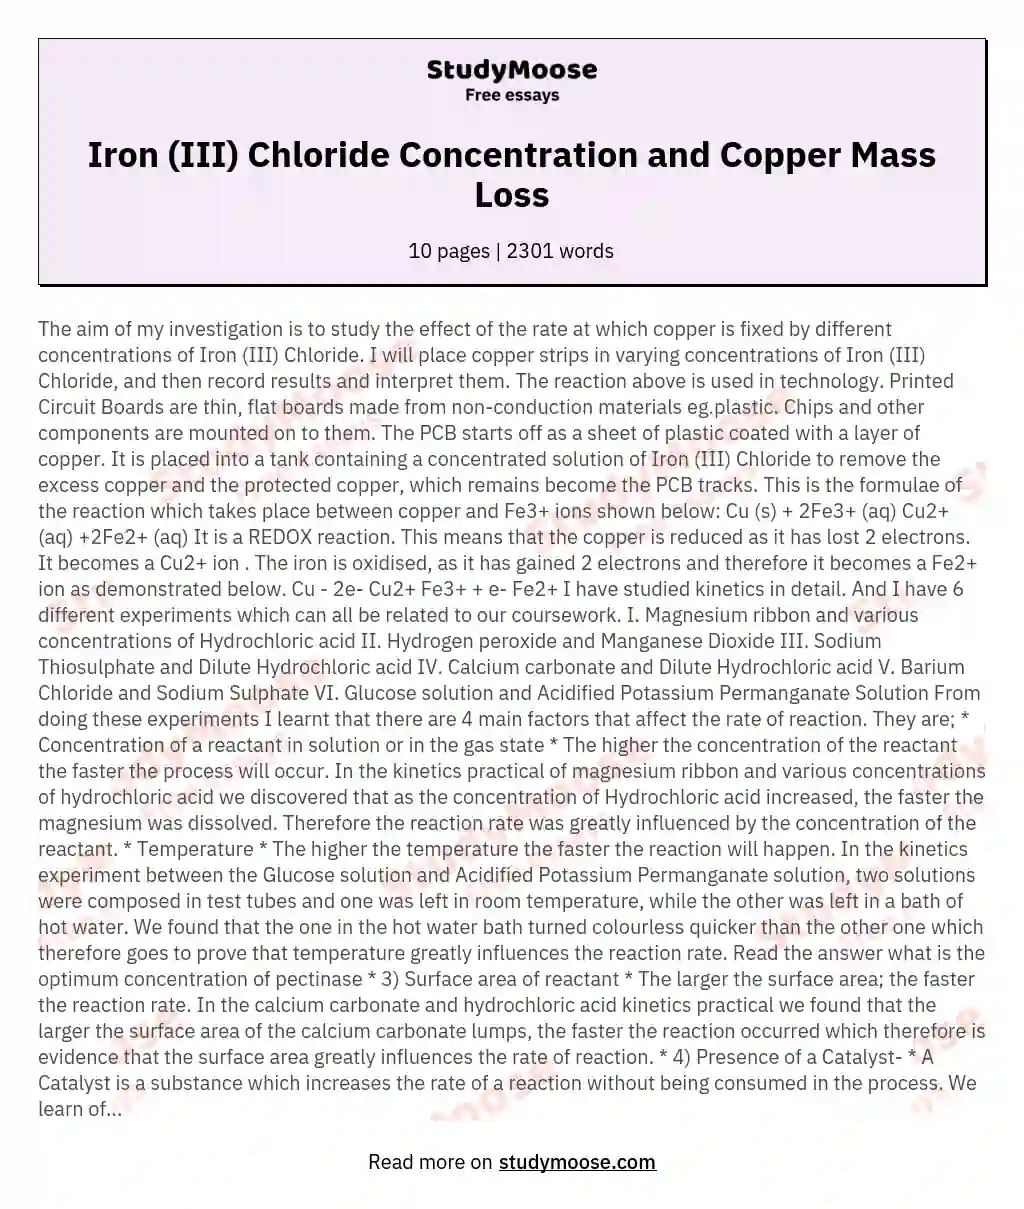 Iron (III) Chloride Concentration and Copper Mass Loss essay